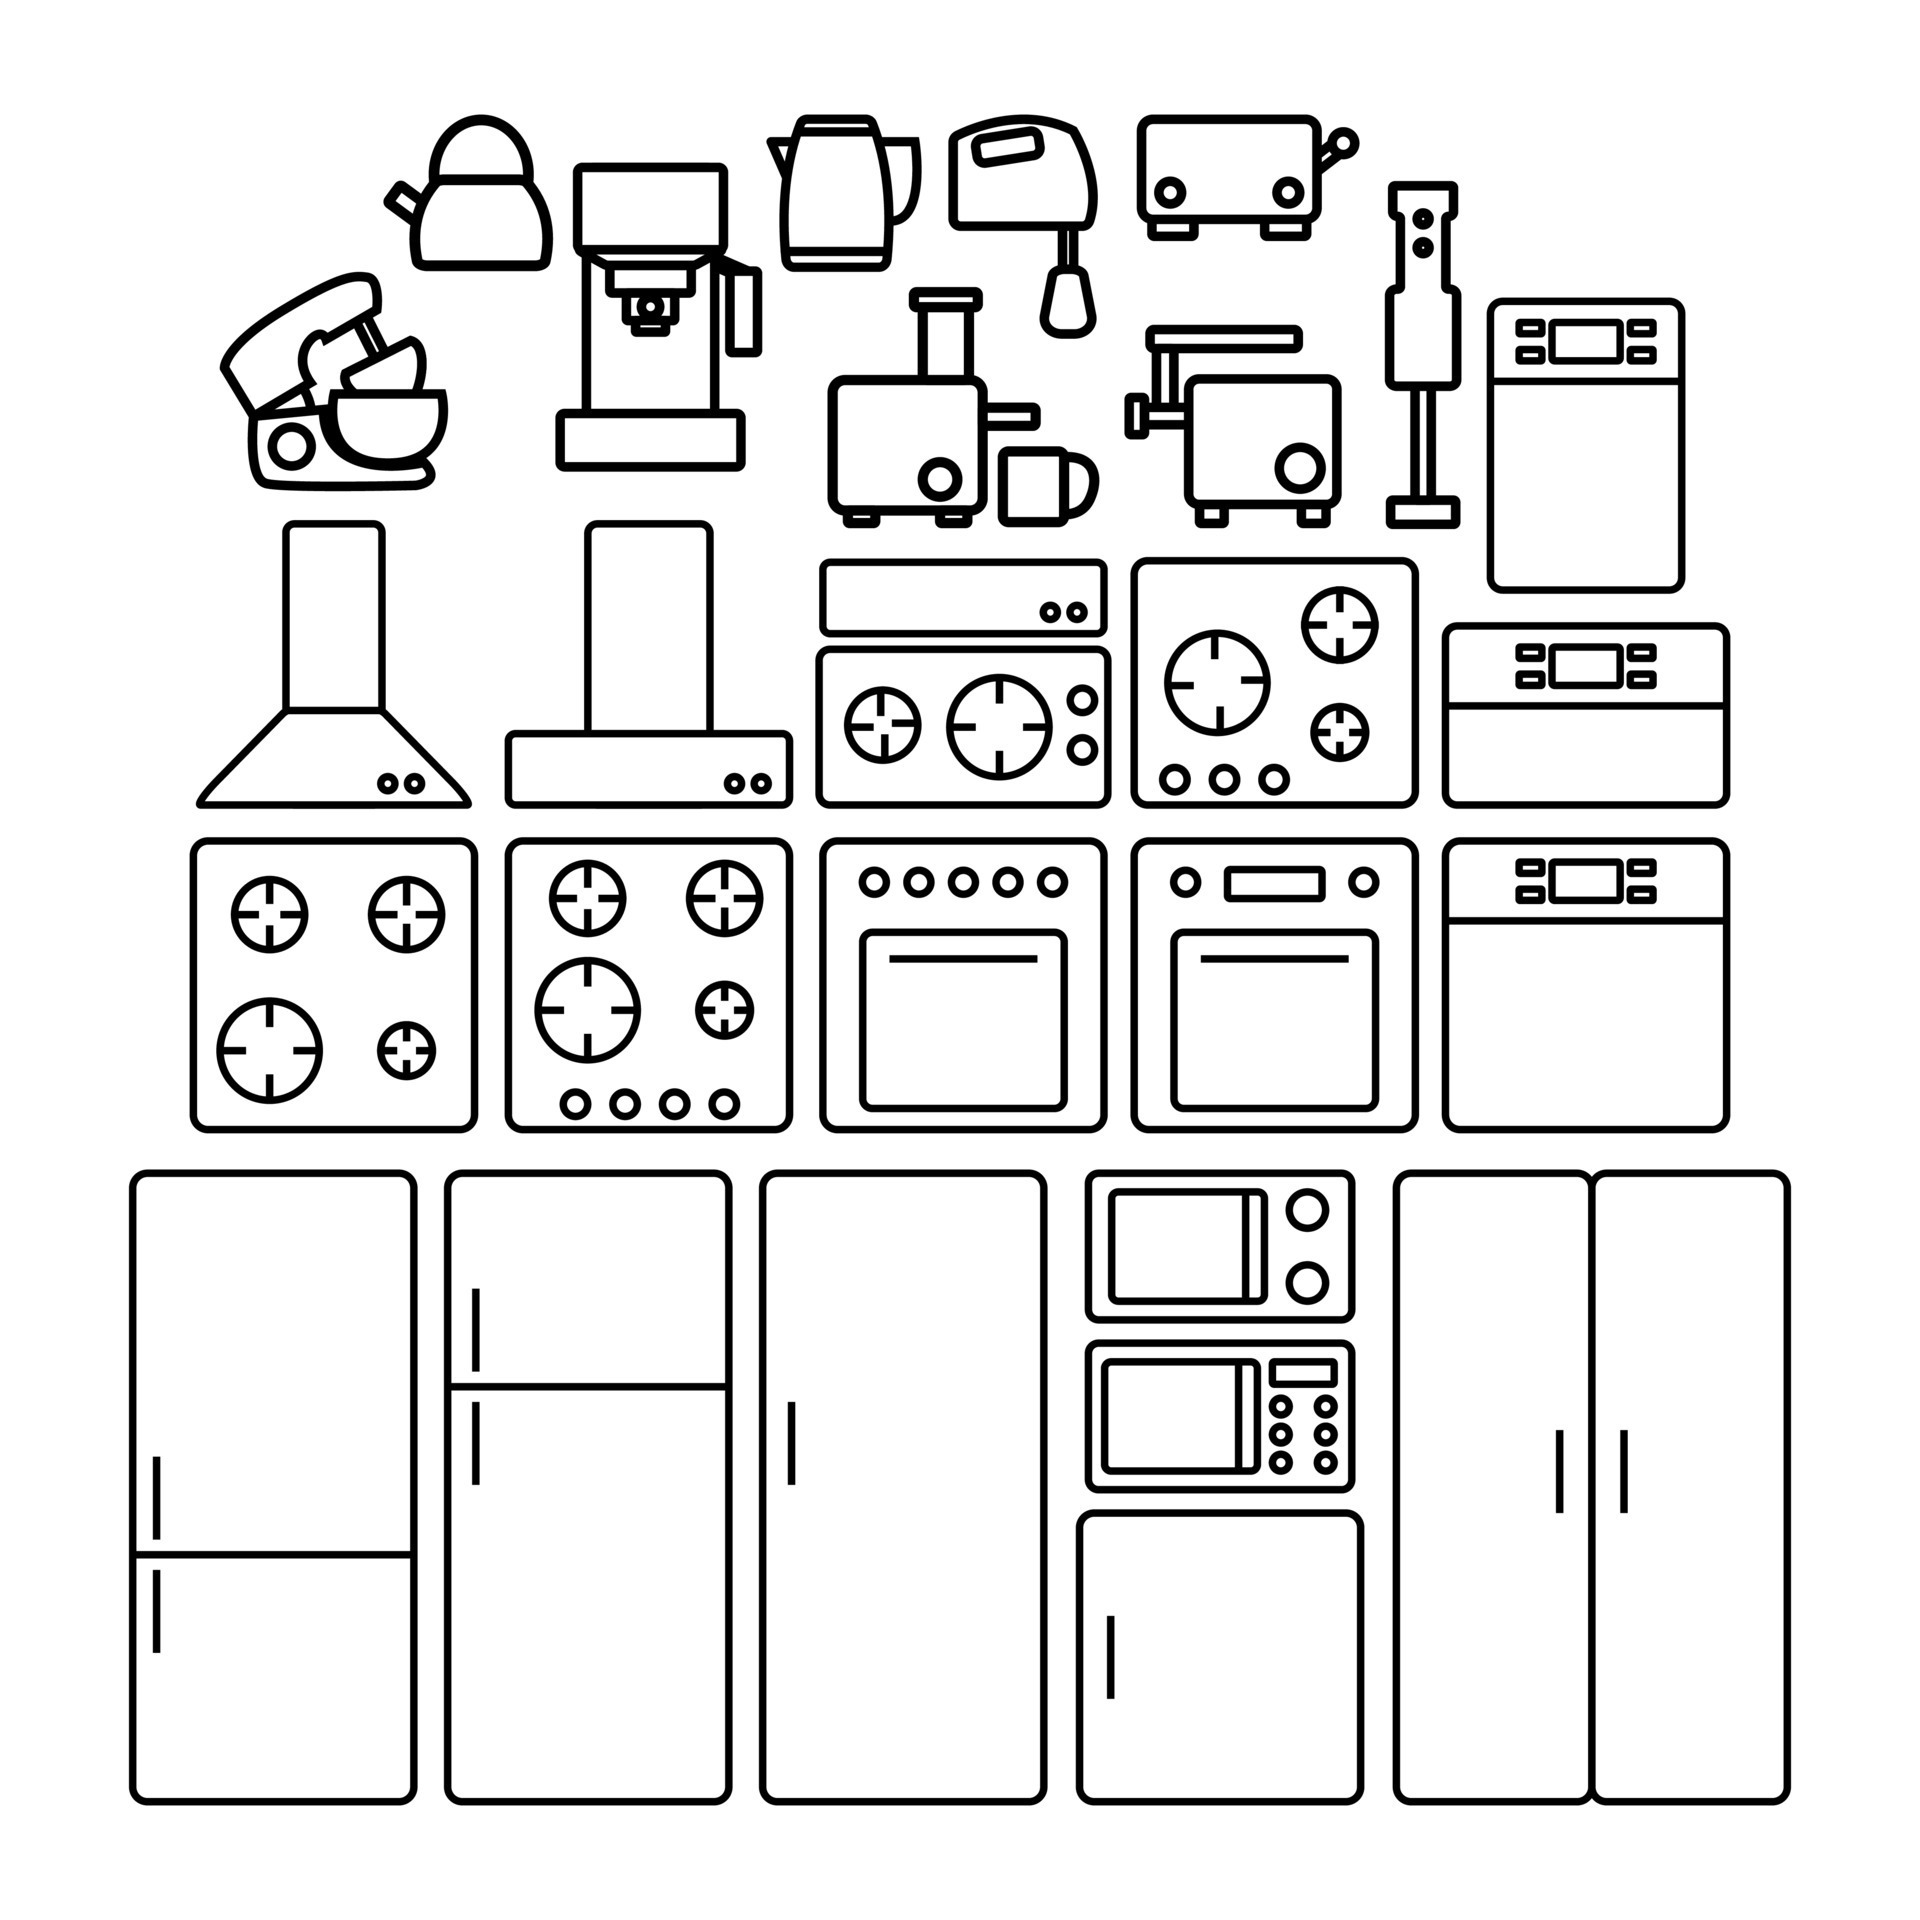 https://static.vecteezy.com/system/resources/previews/014/966/479/original/set-of-kitchen-appliances-household-icons-thin-line-free-vector.jpg